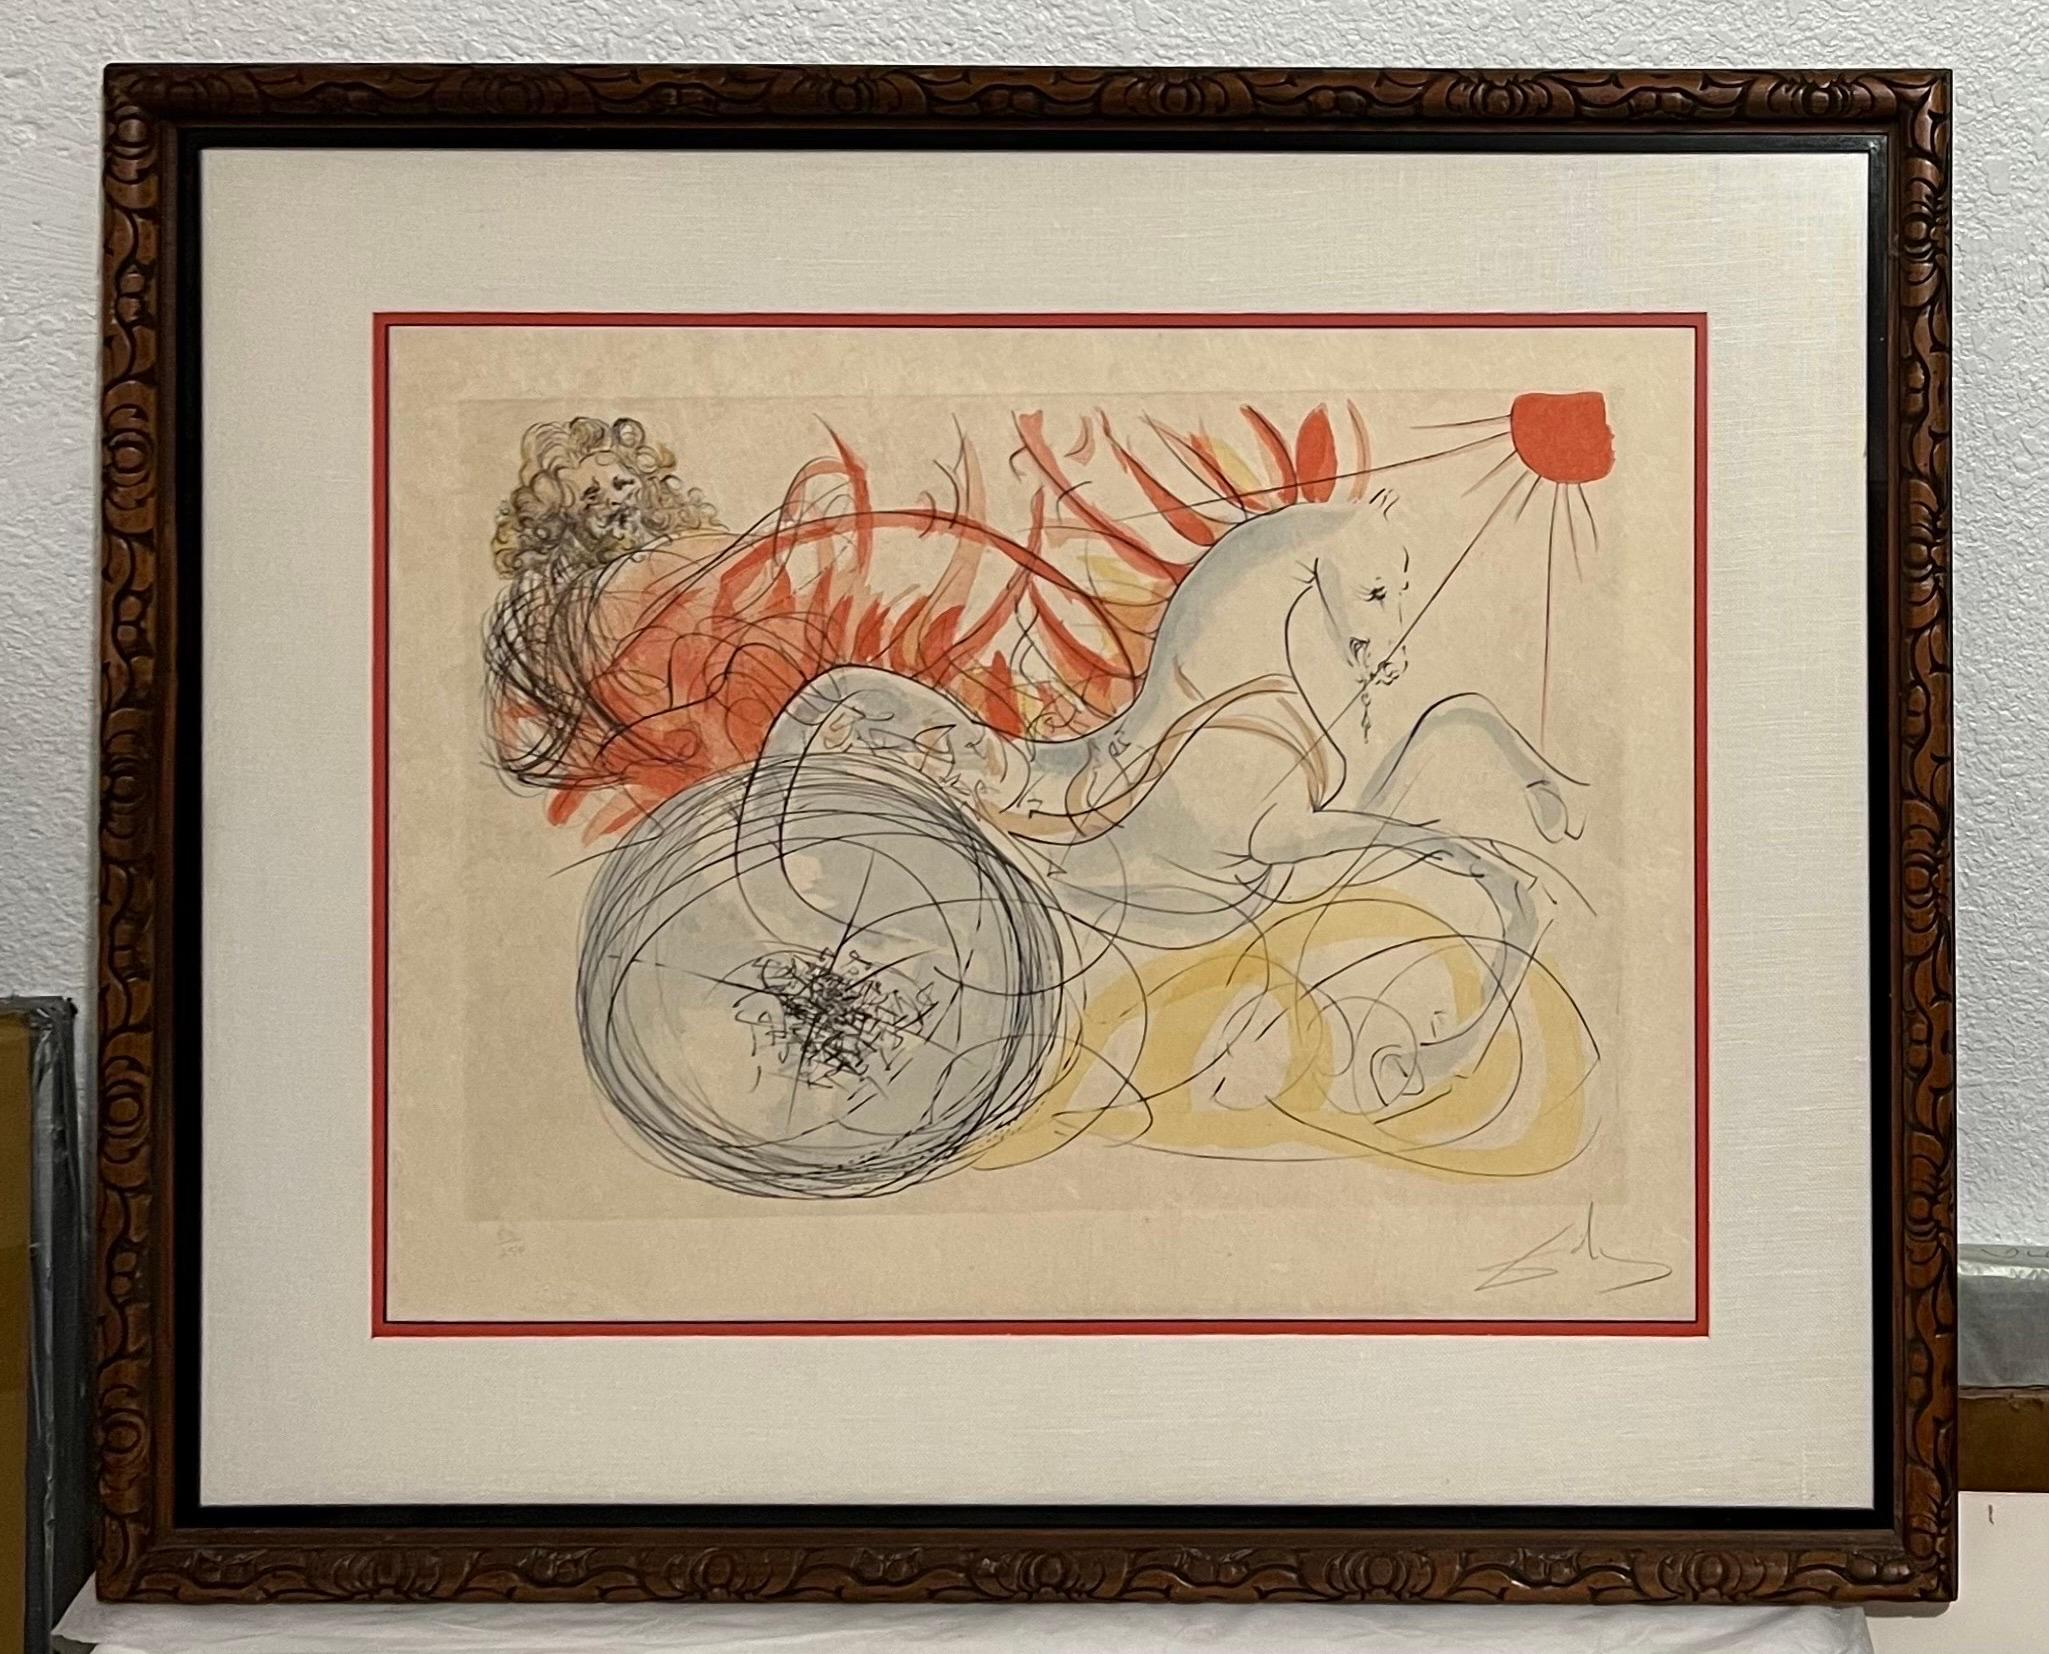 Surrealist Salvador Dali Large Pochoir Etching Drypoint Lithograph Chariot Rider - Print by Salvador Dalí